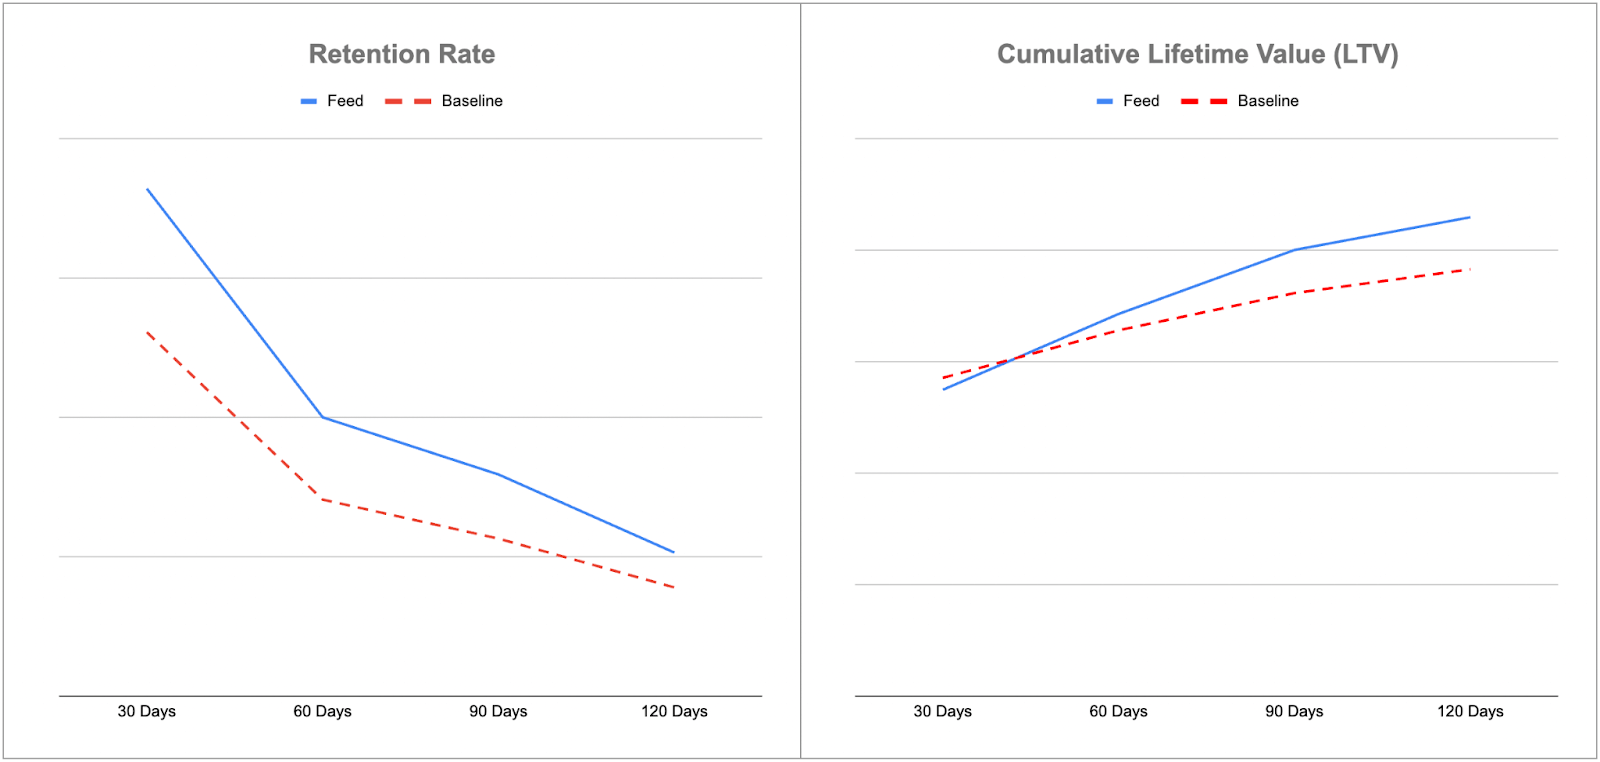 Two graphs. The first graph shows the retention rate over time of users who engaged with the feed vs. the baseline. There are more customers who engaged with the feed at every 30-day interval between 30–120 days. The second graph shows cumulative lifetime value (LTV) over time of users who engaged with the feed vs. the baseline. The LTV for the feed was slightly lower than the baseline at 30 days, but higher at every 30-day interval after that.